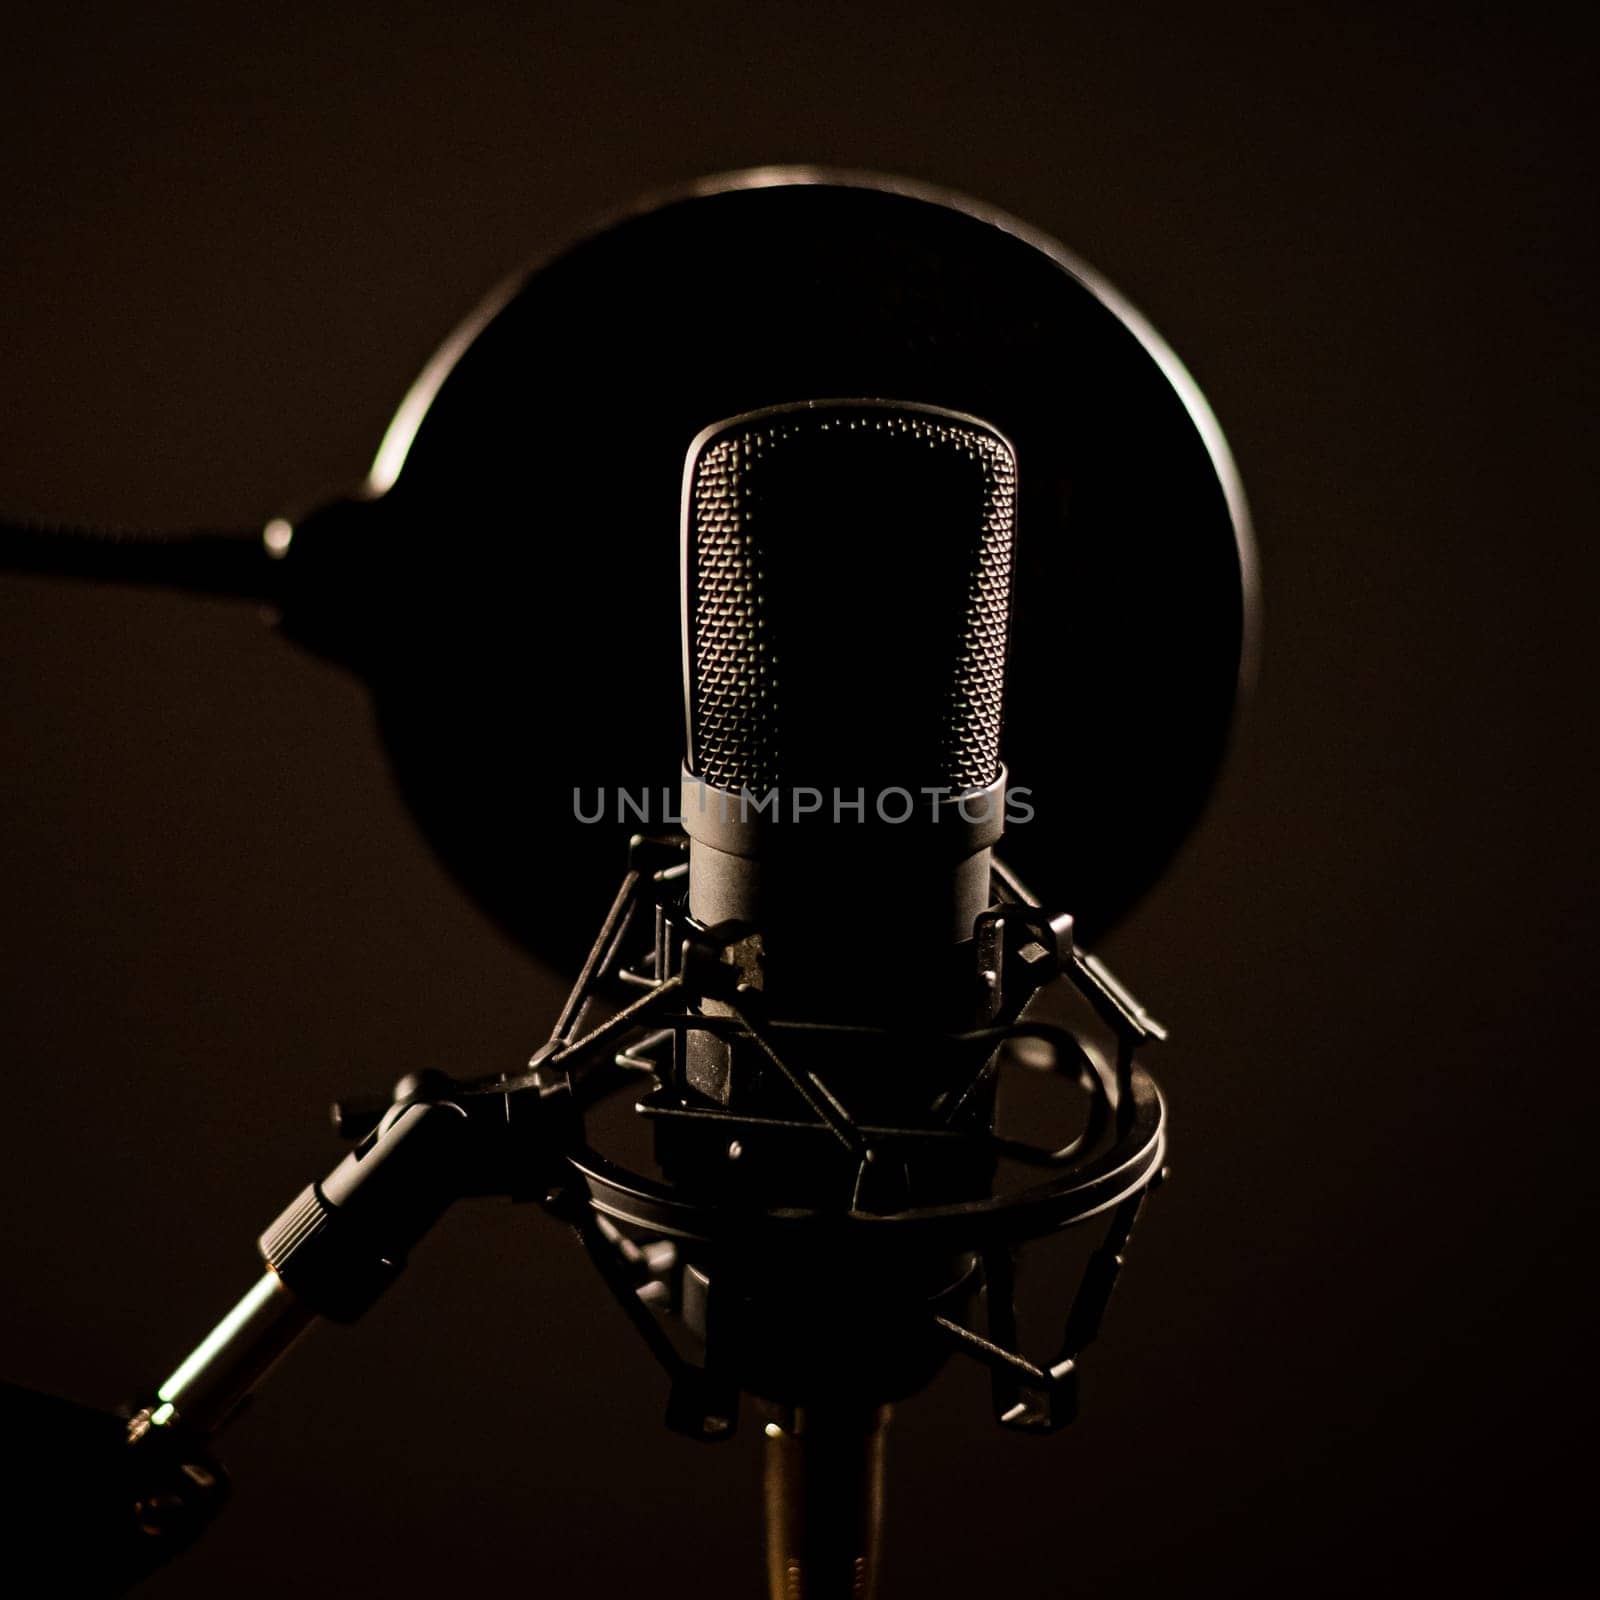 Professional microphone on a dark background.